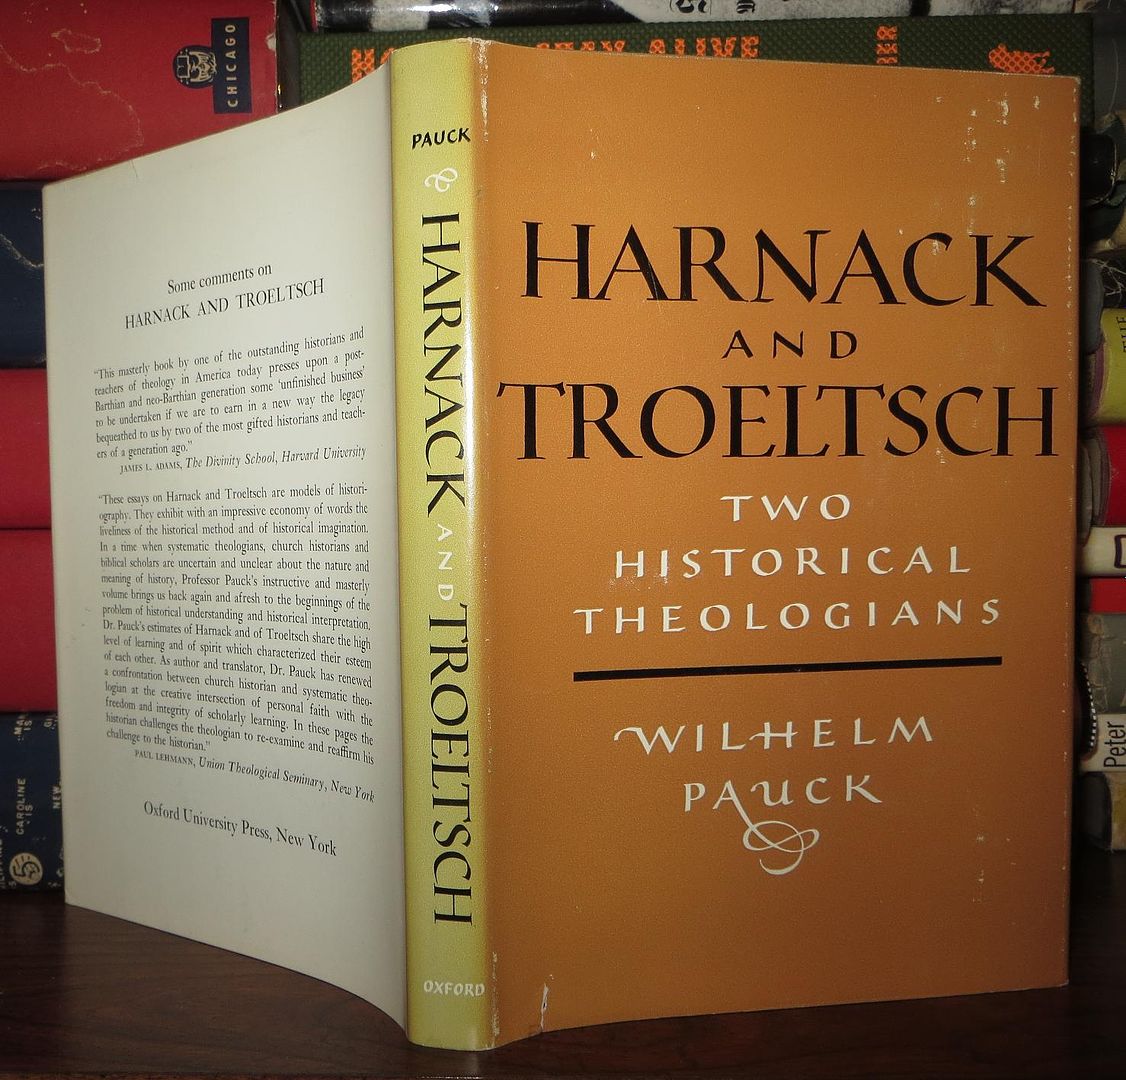 PAUCK, WILHELM - HARNACK, TROELTSCH - Harnack and Troeltsch Two Historical Theologians